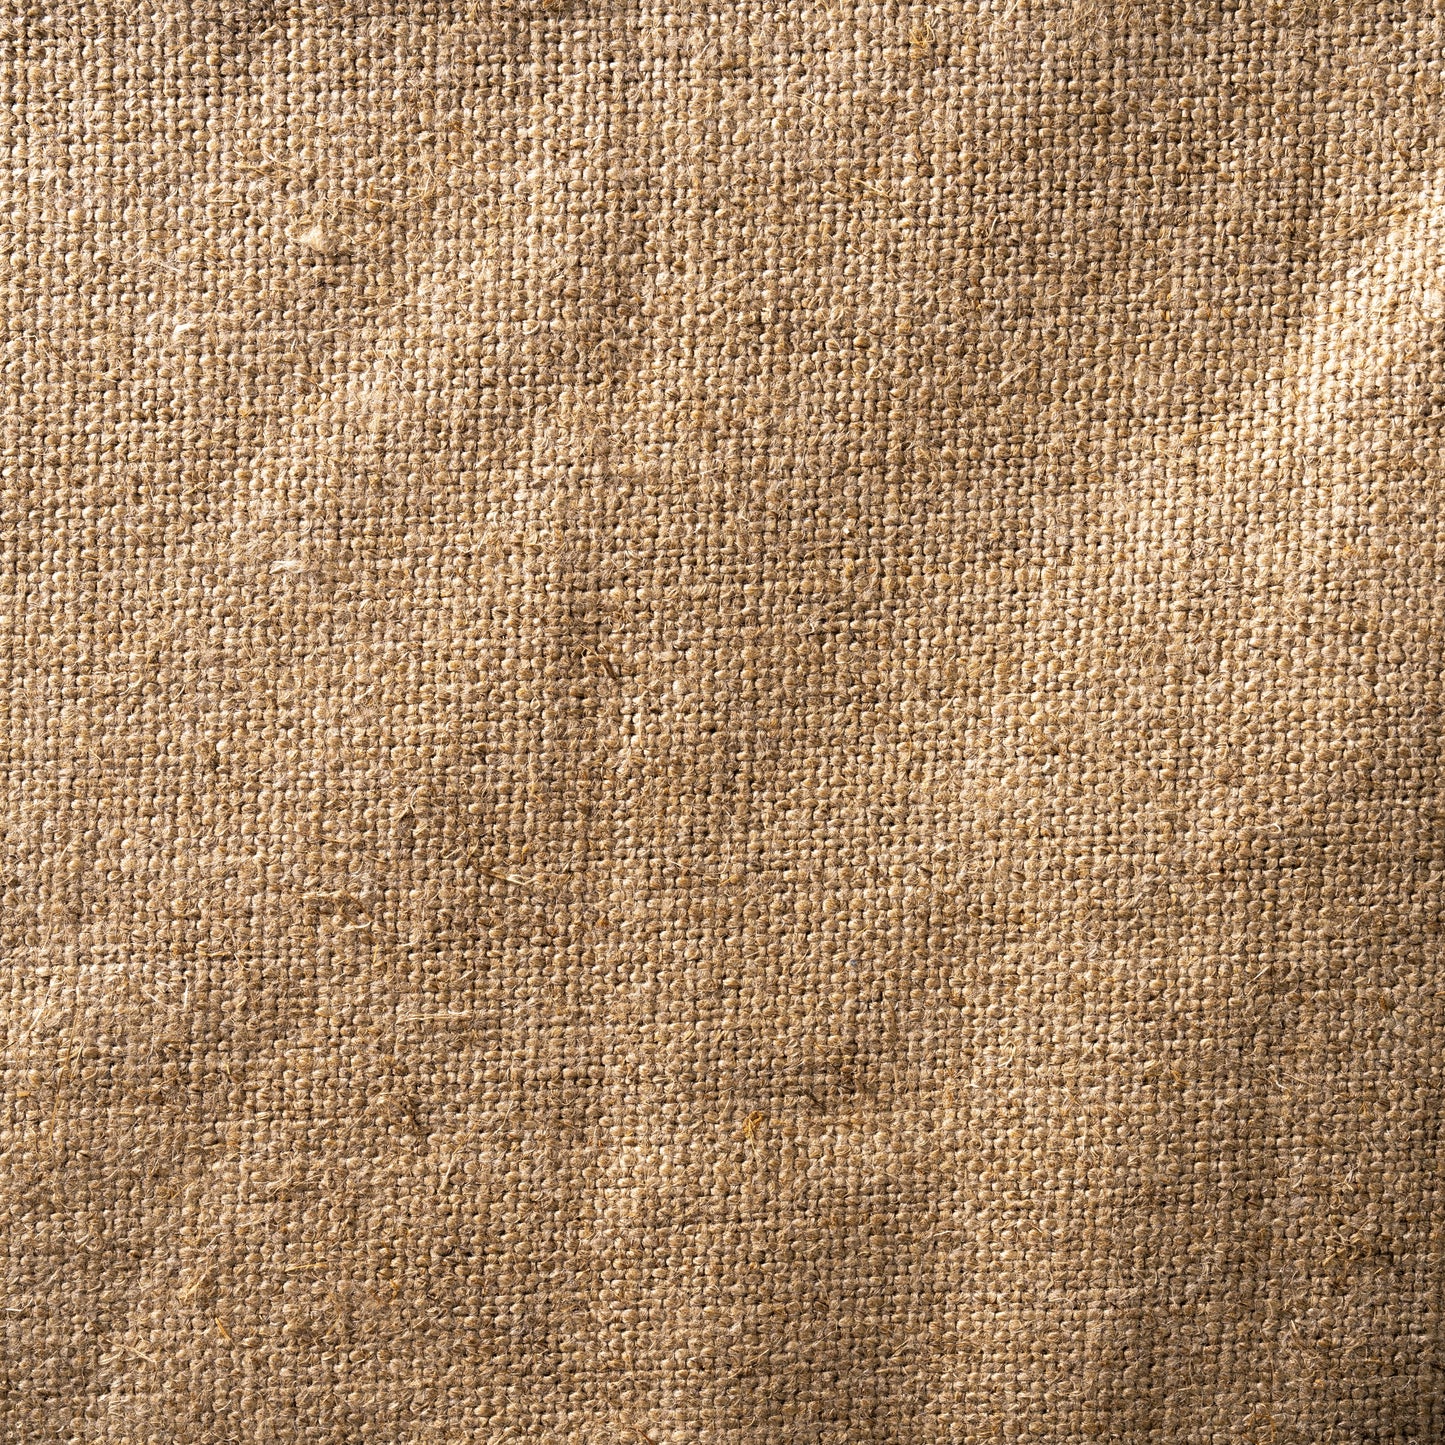 Upholstery Weight 100% Linen (12.5 oz/square yard) in Burlap Warm Swatch